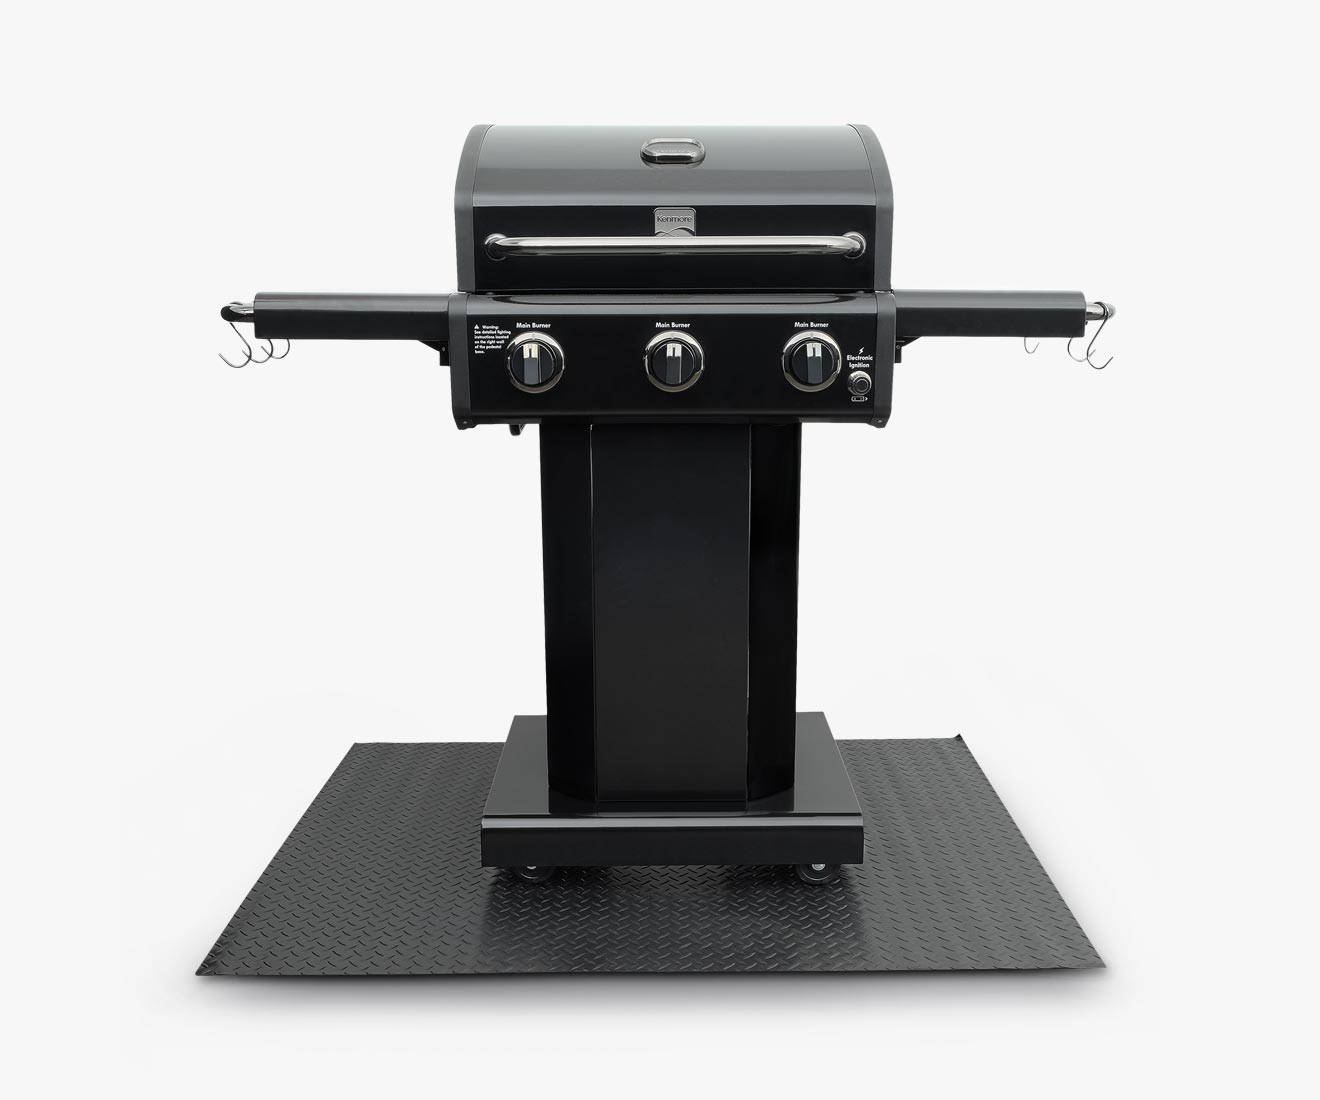 Perrmasteel Under Grill Mat Barbecue Barbeque BBQ Grill PA-12005